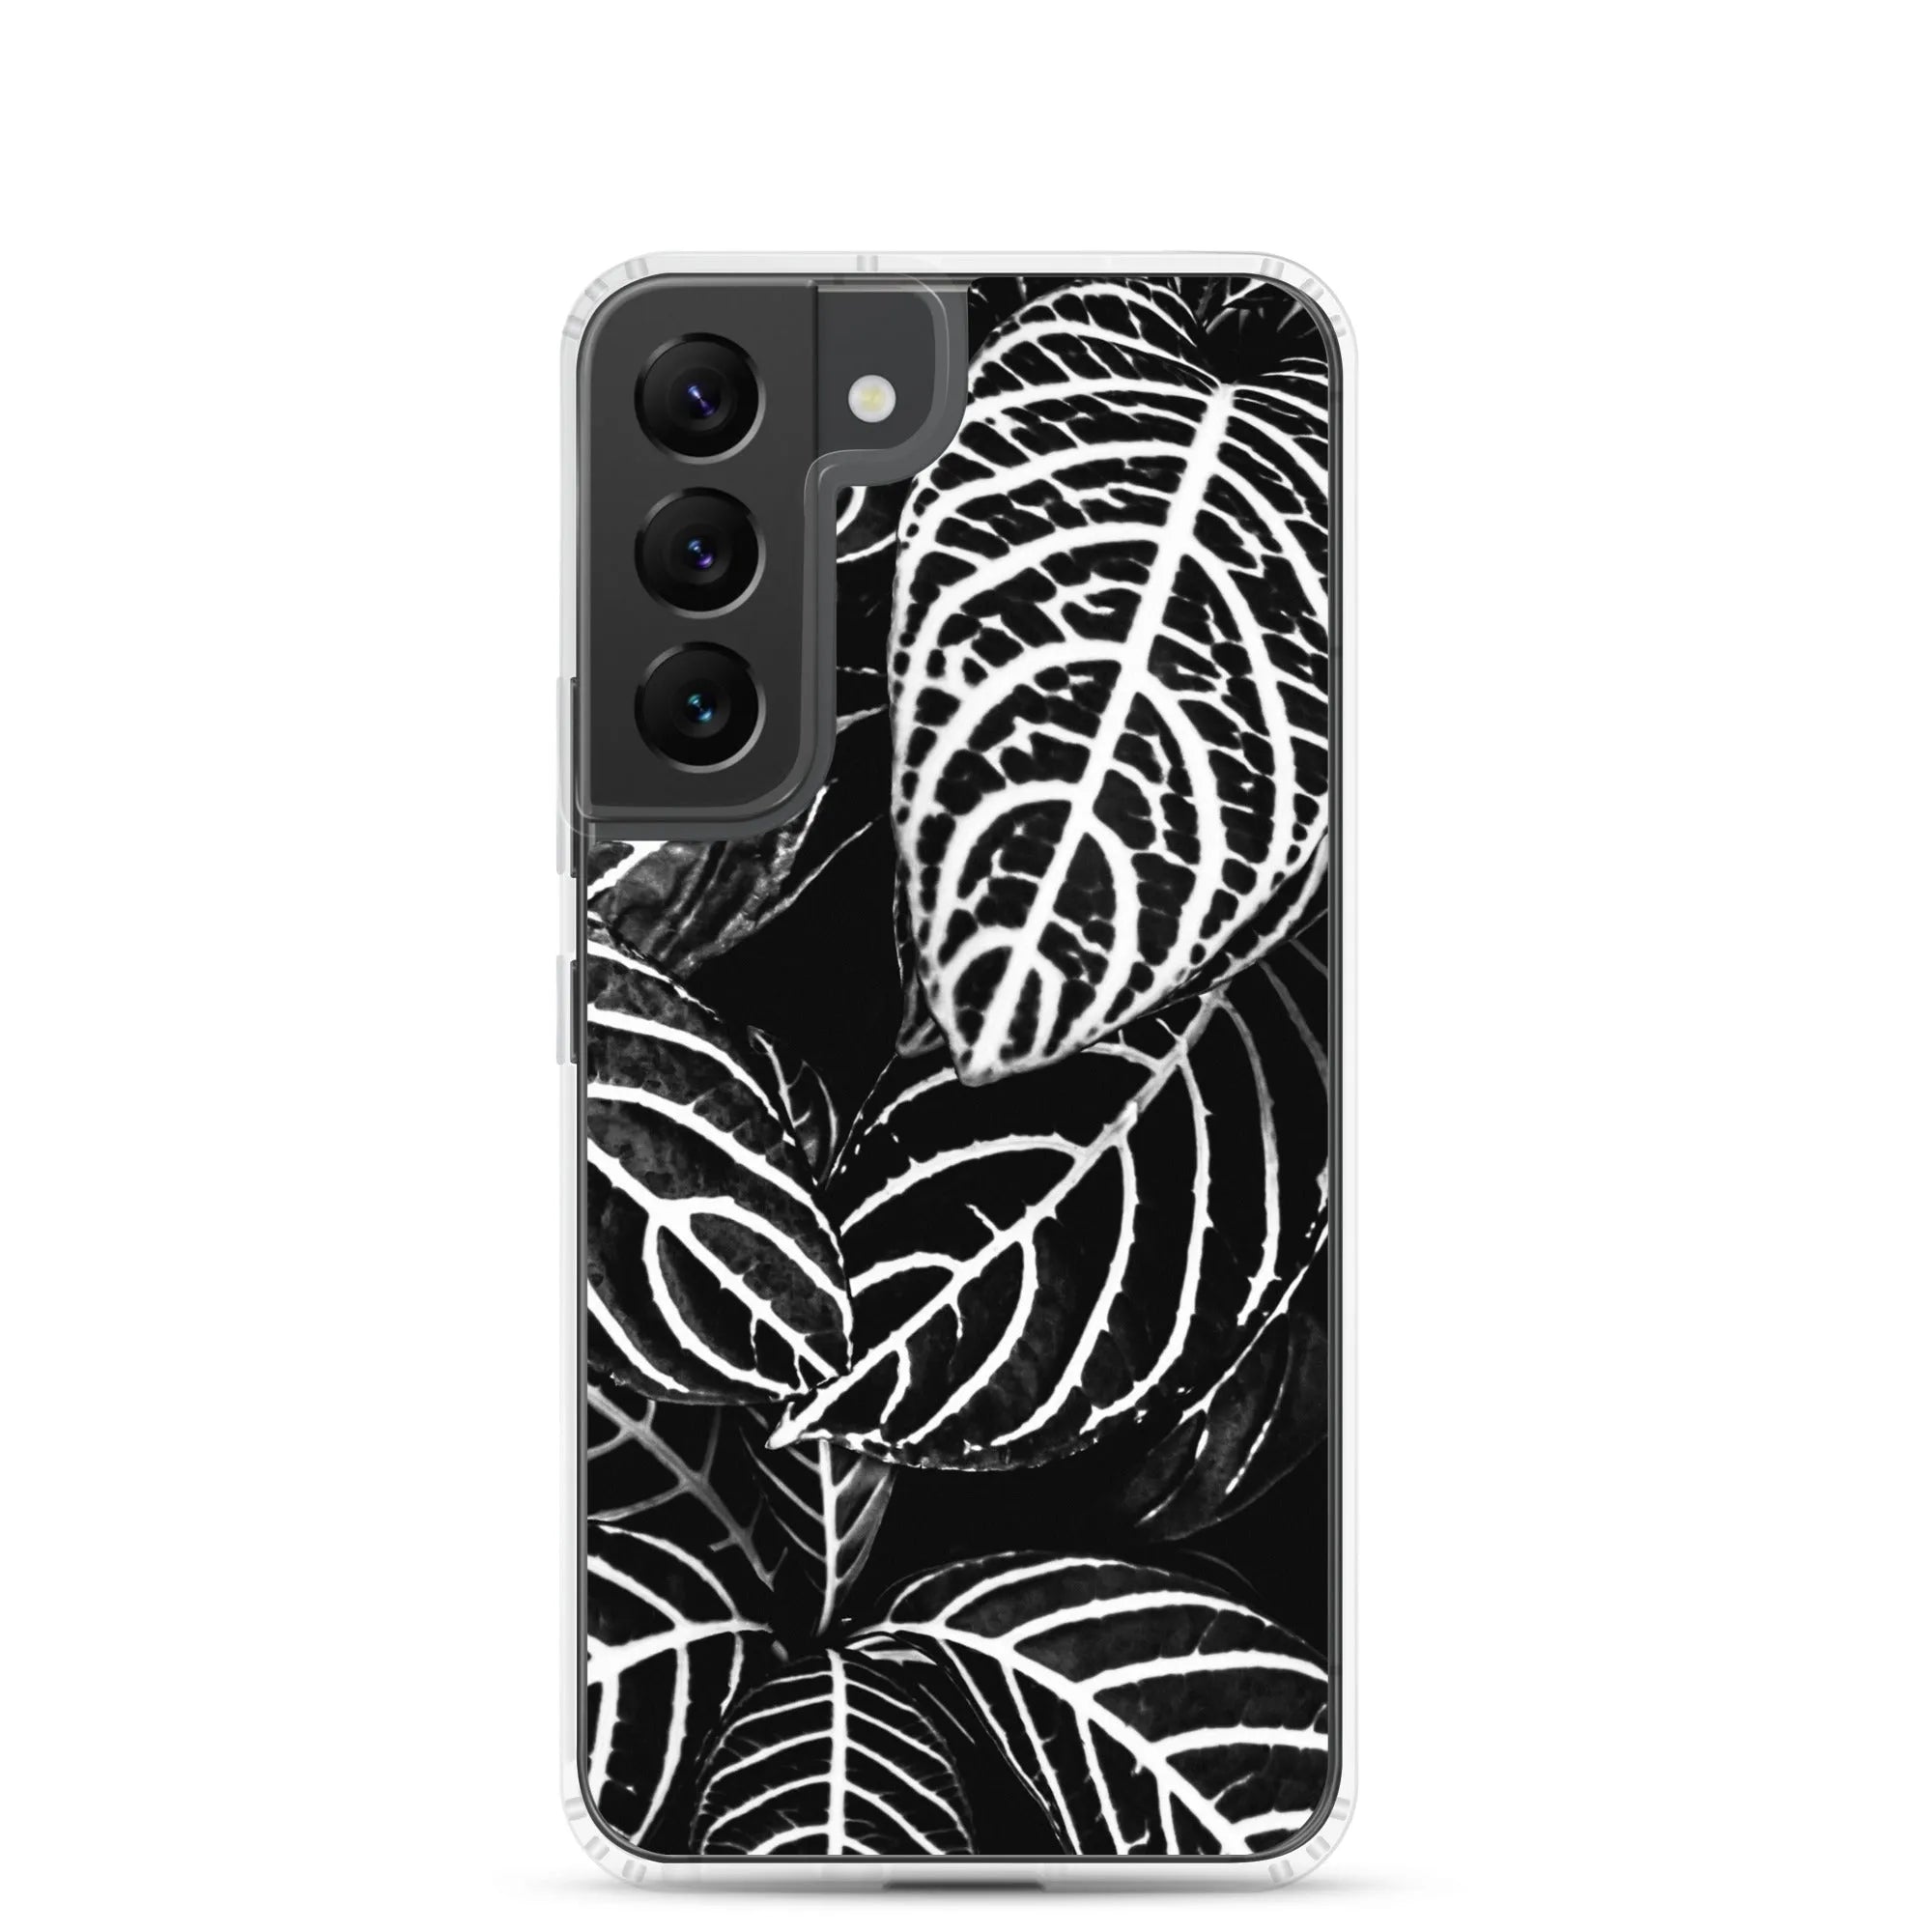 Just The Headlines Samsung Galaxy Case - Black And White - Samsung Galaxy S22 - Mobile Phone Cases - Aesthetic Art